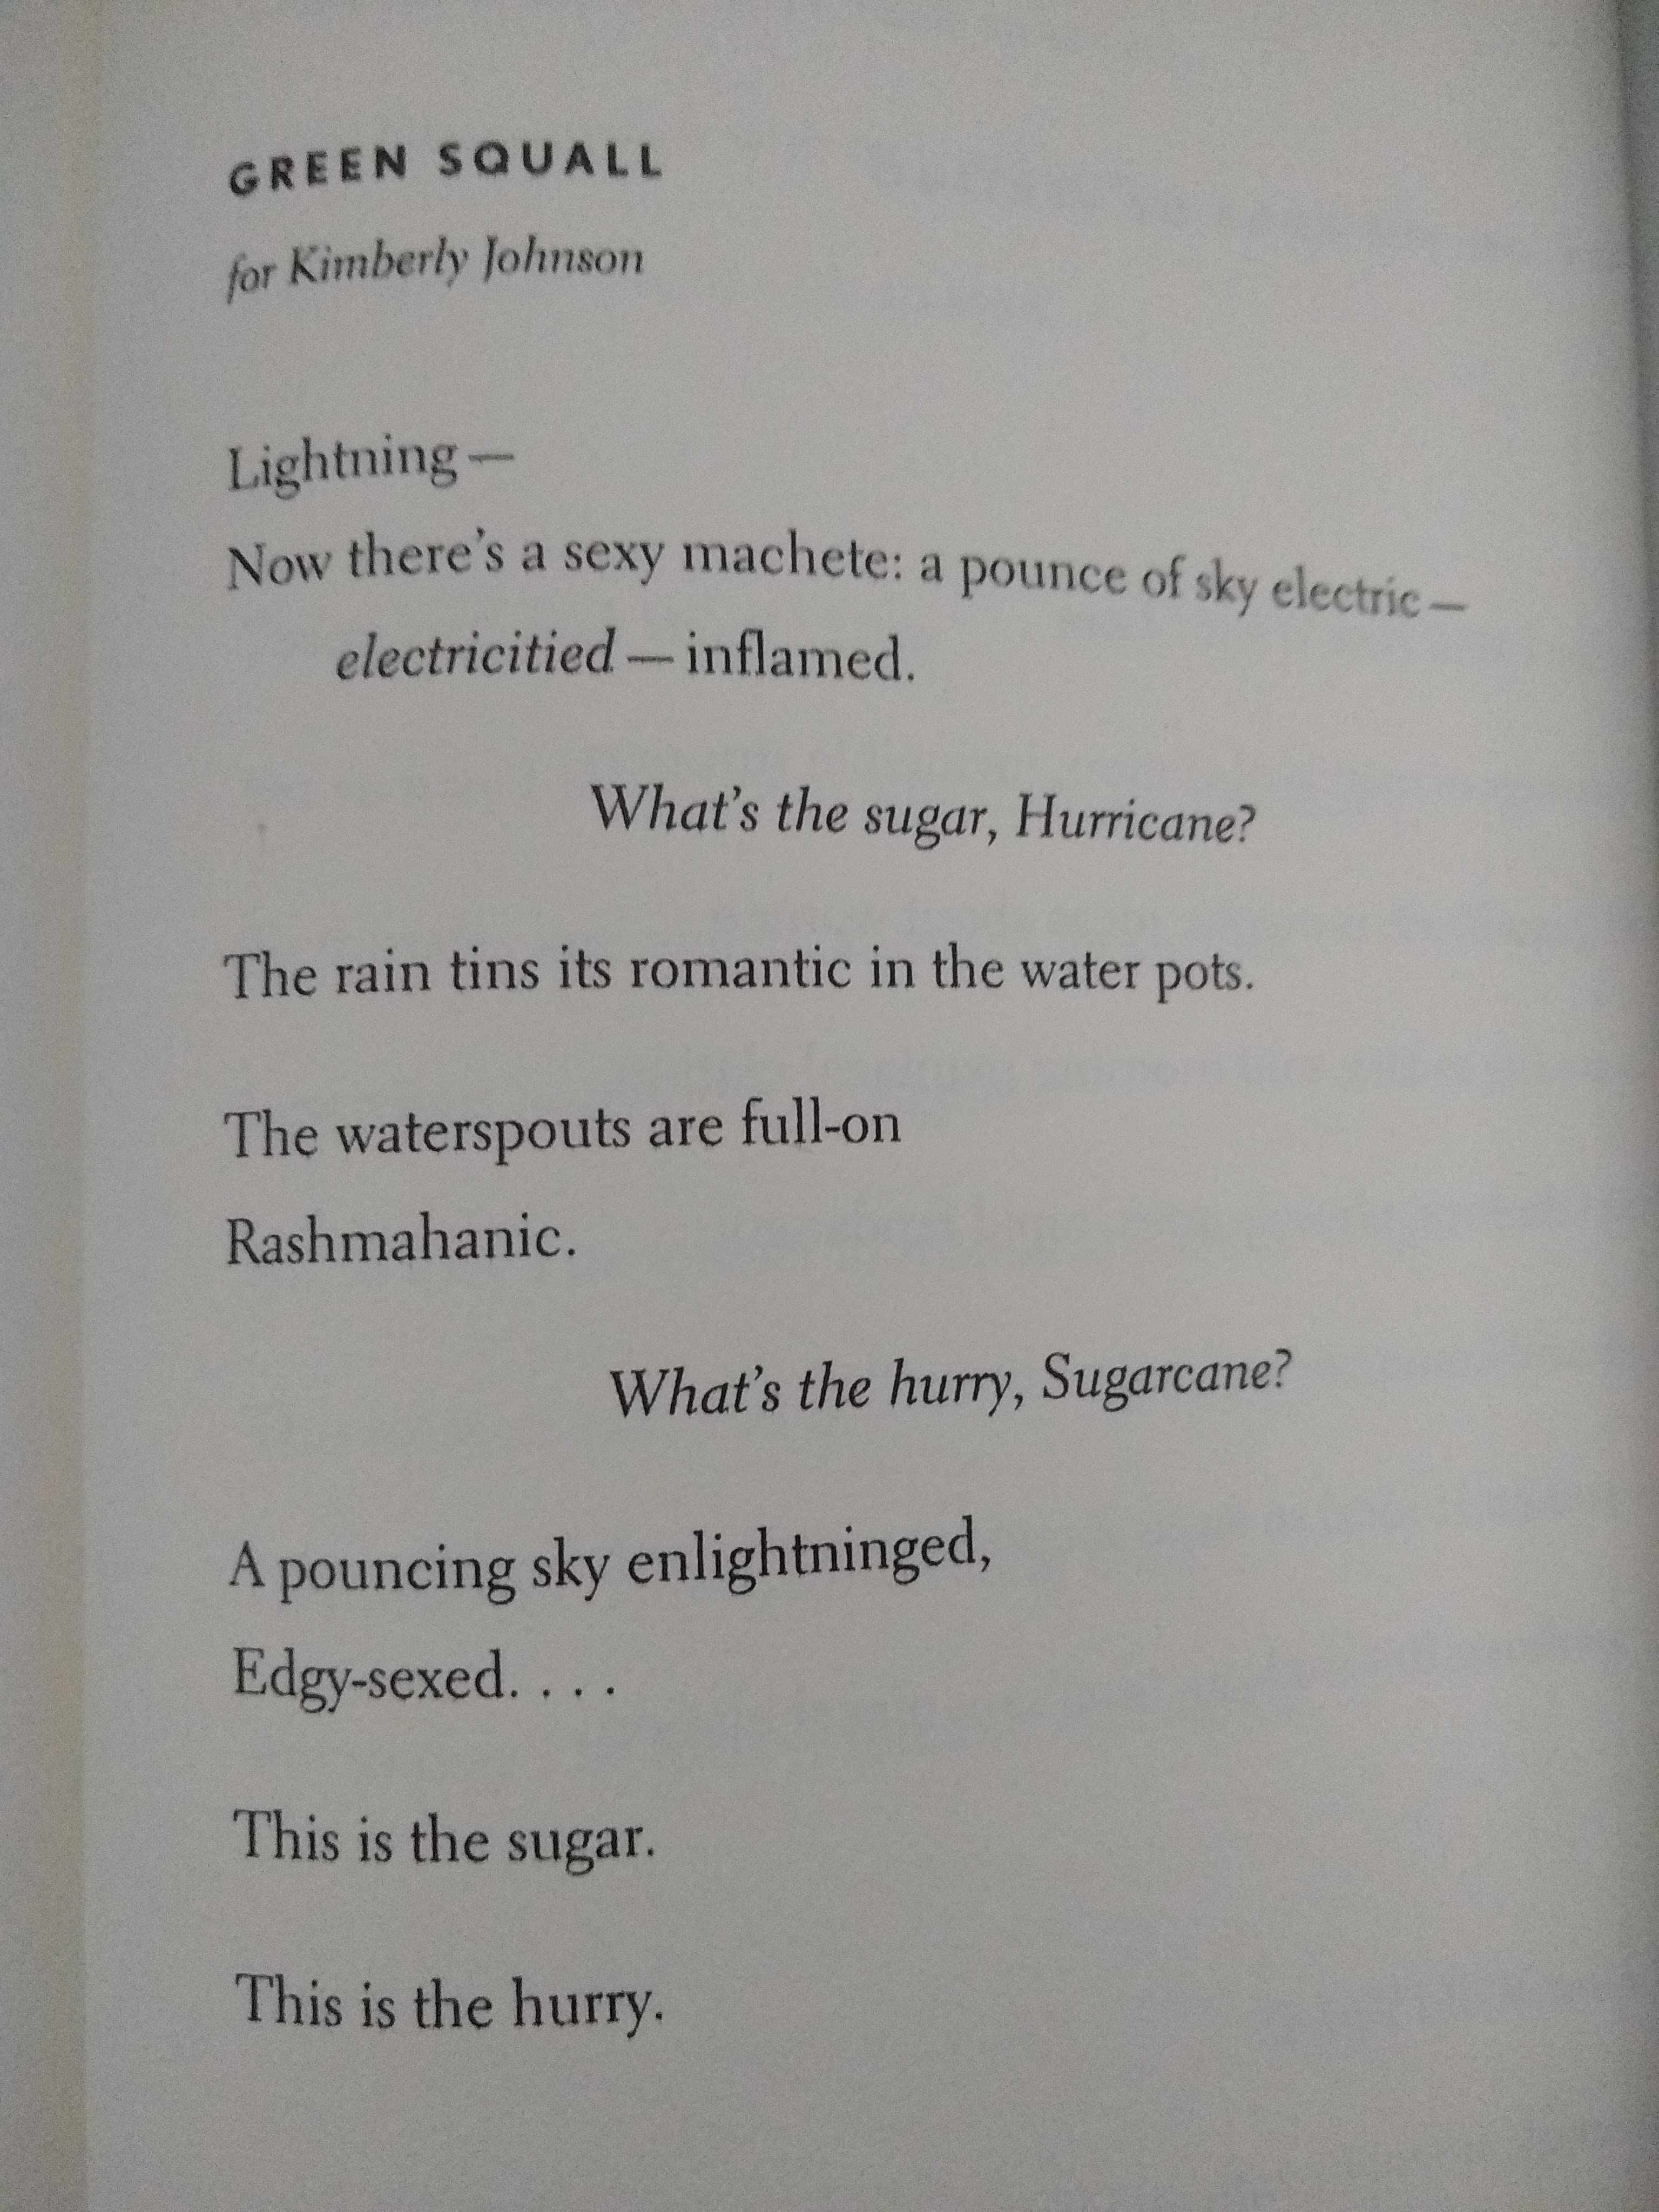 The title poem from Jay Hopler's 2005 collection 'Green Squall: for Kimberly Johnson / Lightning — / Now there's a sexy machete: a pounce of sky electric — / electricitied — inflamed. / What's the sugar, Hurricane? / The rain tins its romantic in the water pots. / The waterspouts are full-on / Rashmahanic. / What's the hurry, Sugarcane? / A pouncing sky enlightninged, / Edgy-sexed. . . . / This is the sugar. / This is the hurry.